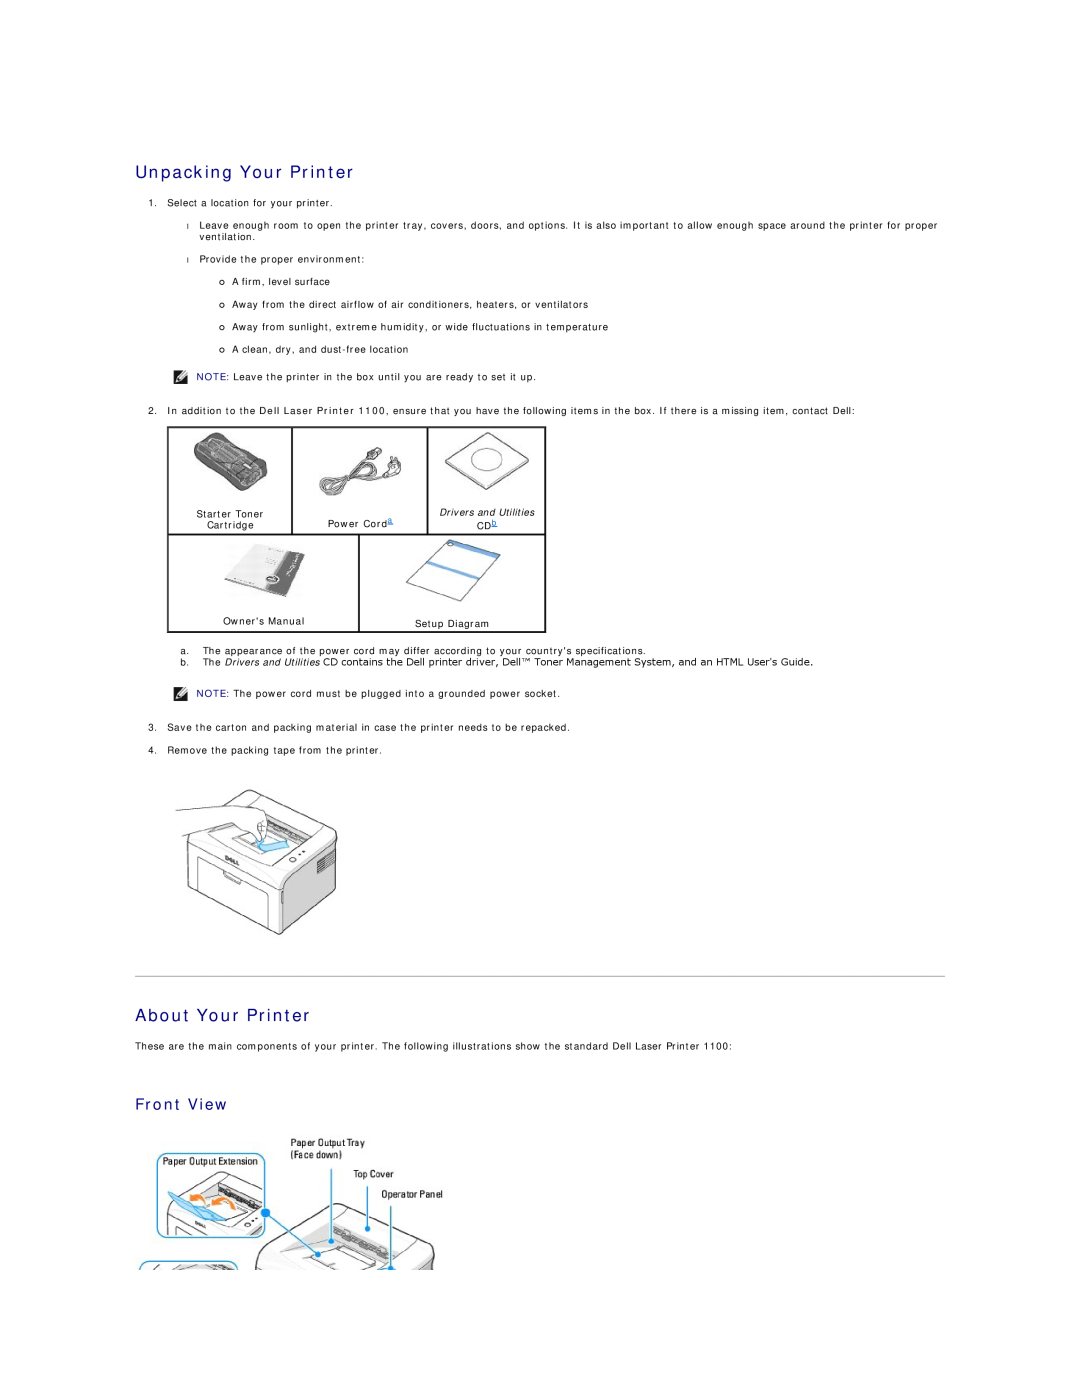 Dell 1100 specifications Unpacking Your Printer, About Your Printer, Front View, Drivers and Utilities 